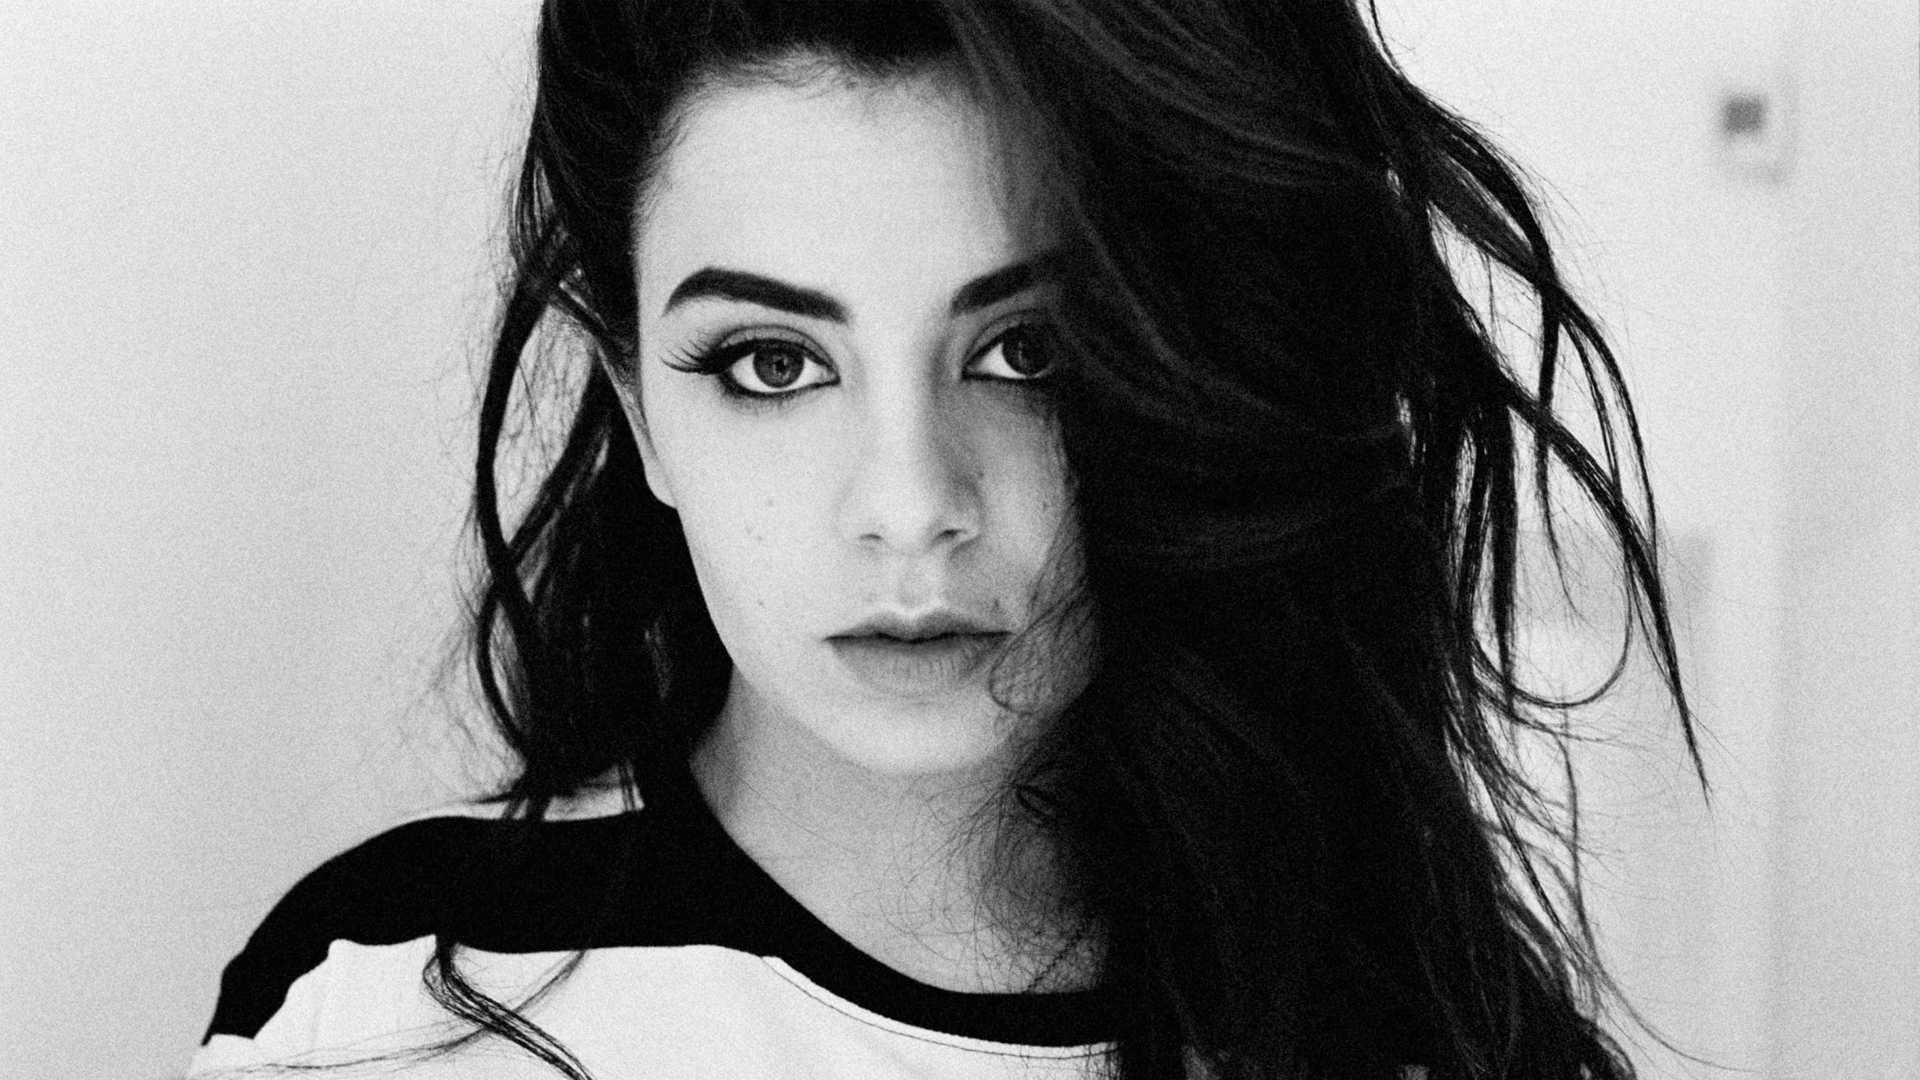 Charli XCX Looking At Viewer Women Portrait Monochrome Long Hair 1920x1080